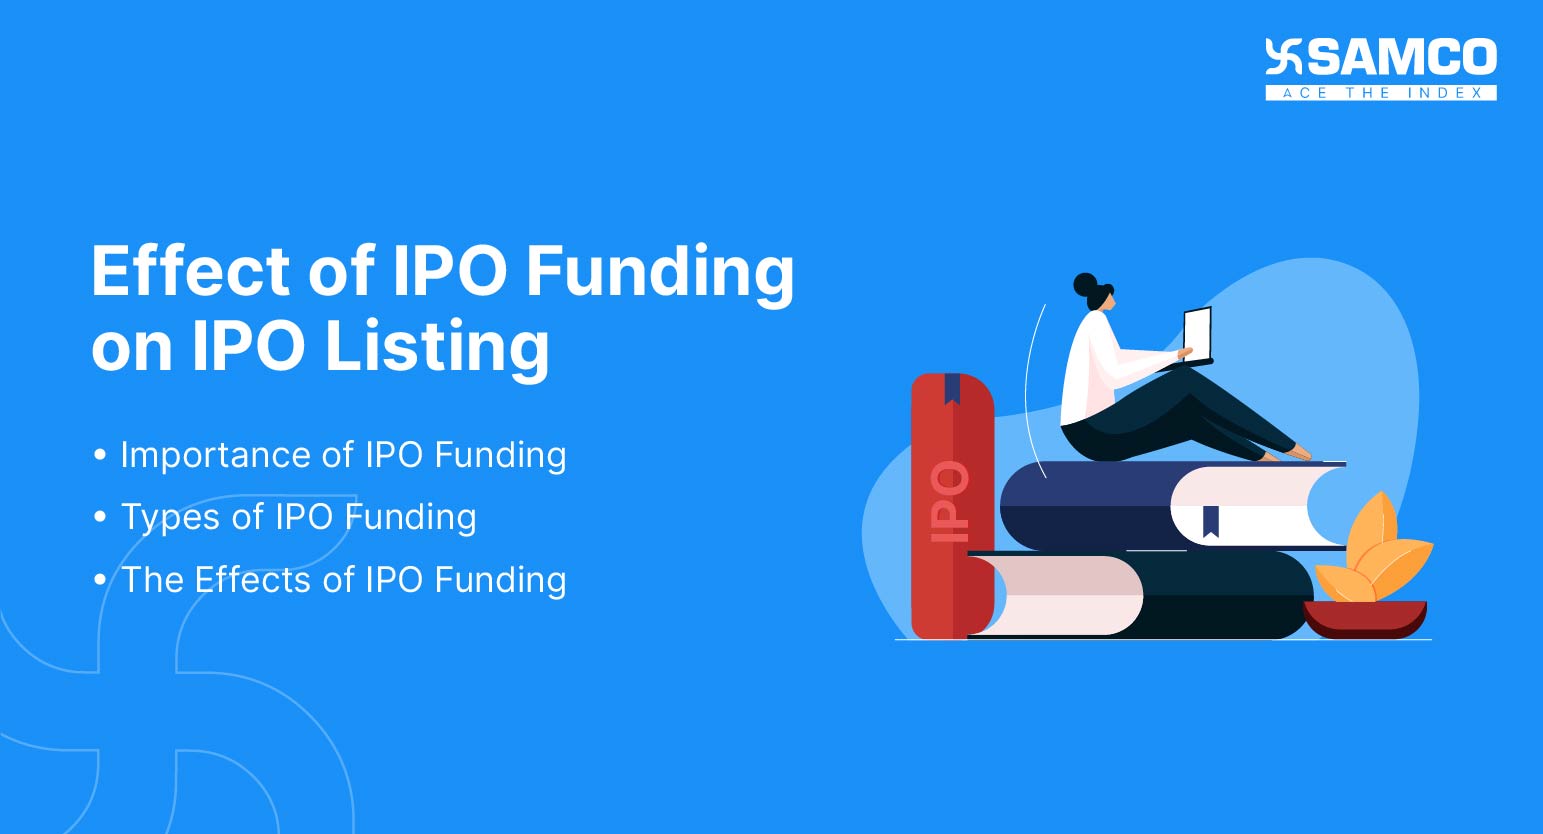 Effect of IPO Funding on IPO Listing